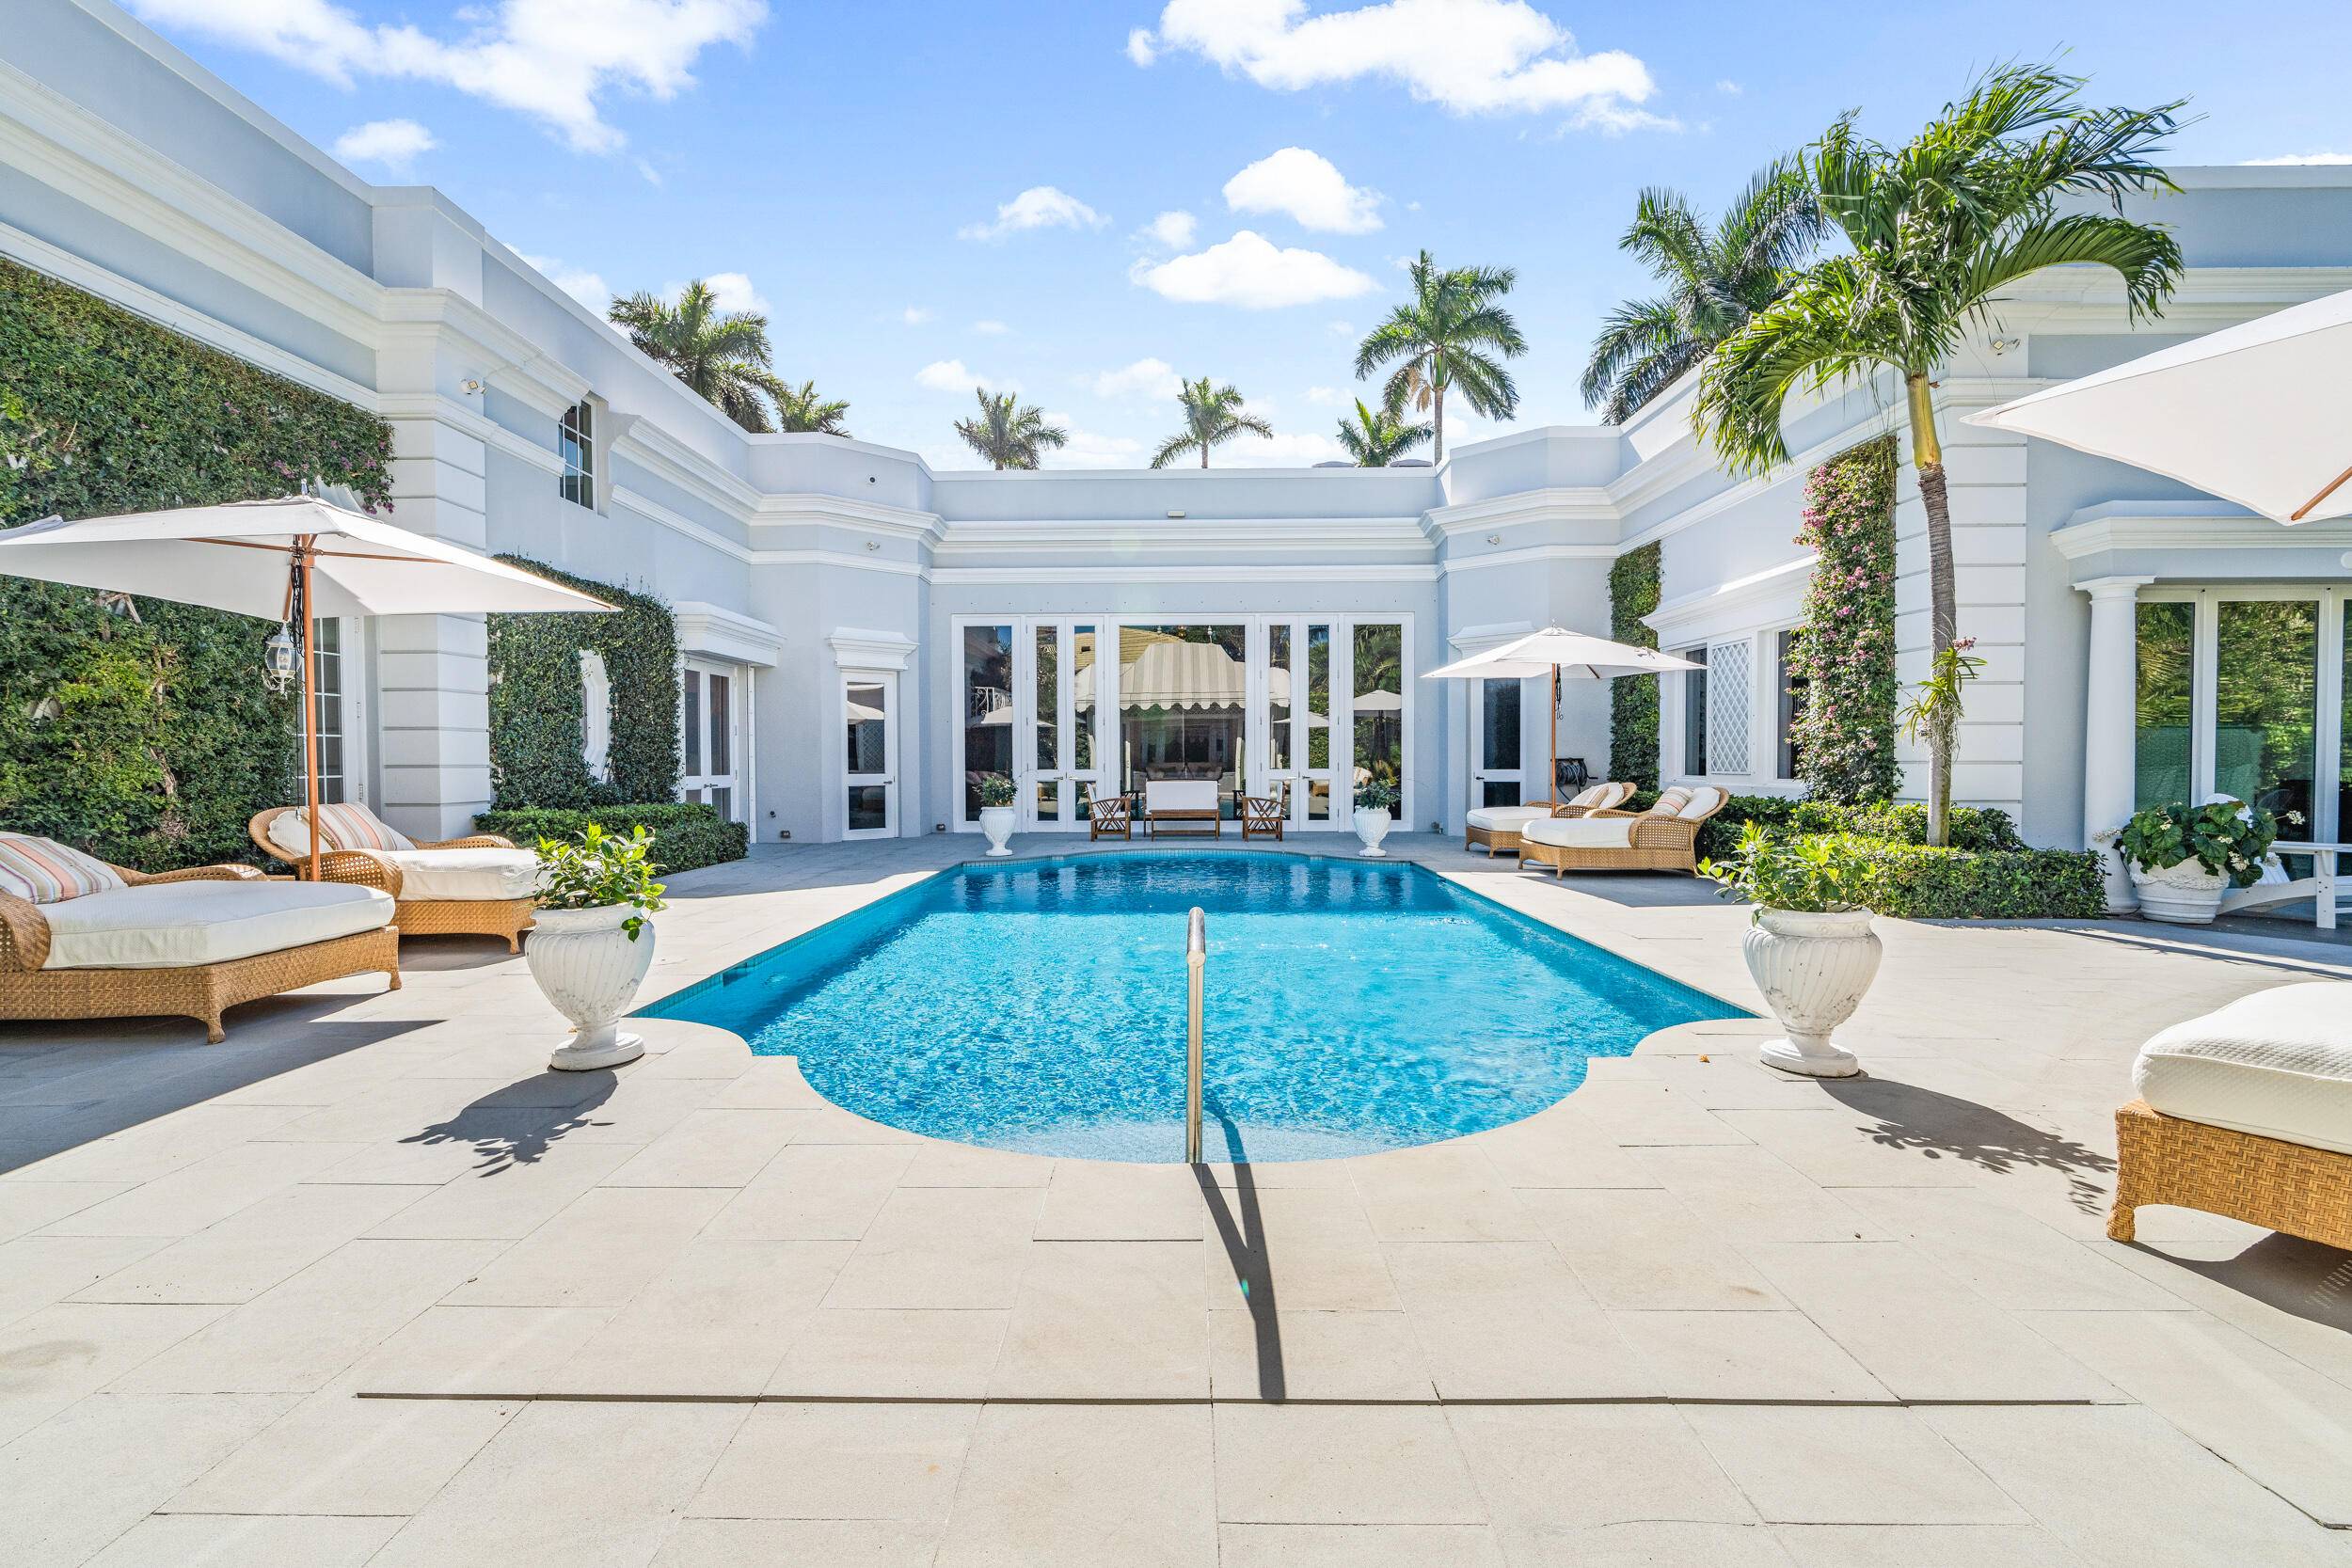 Regally elevated on over half acre this very proper Palm Beach residence showcases quintessential Palladian architecture set within beautifully landscaped pool gardens.